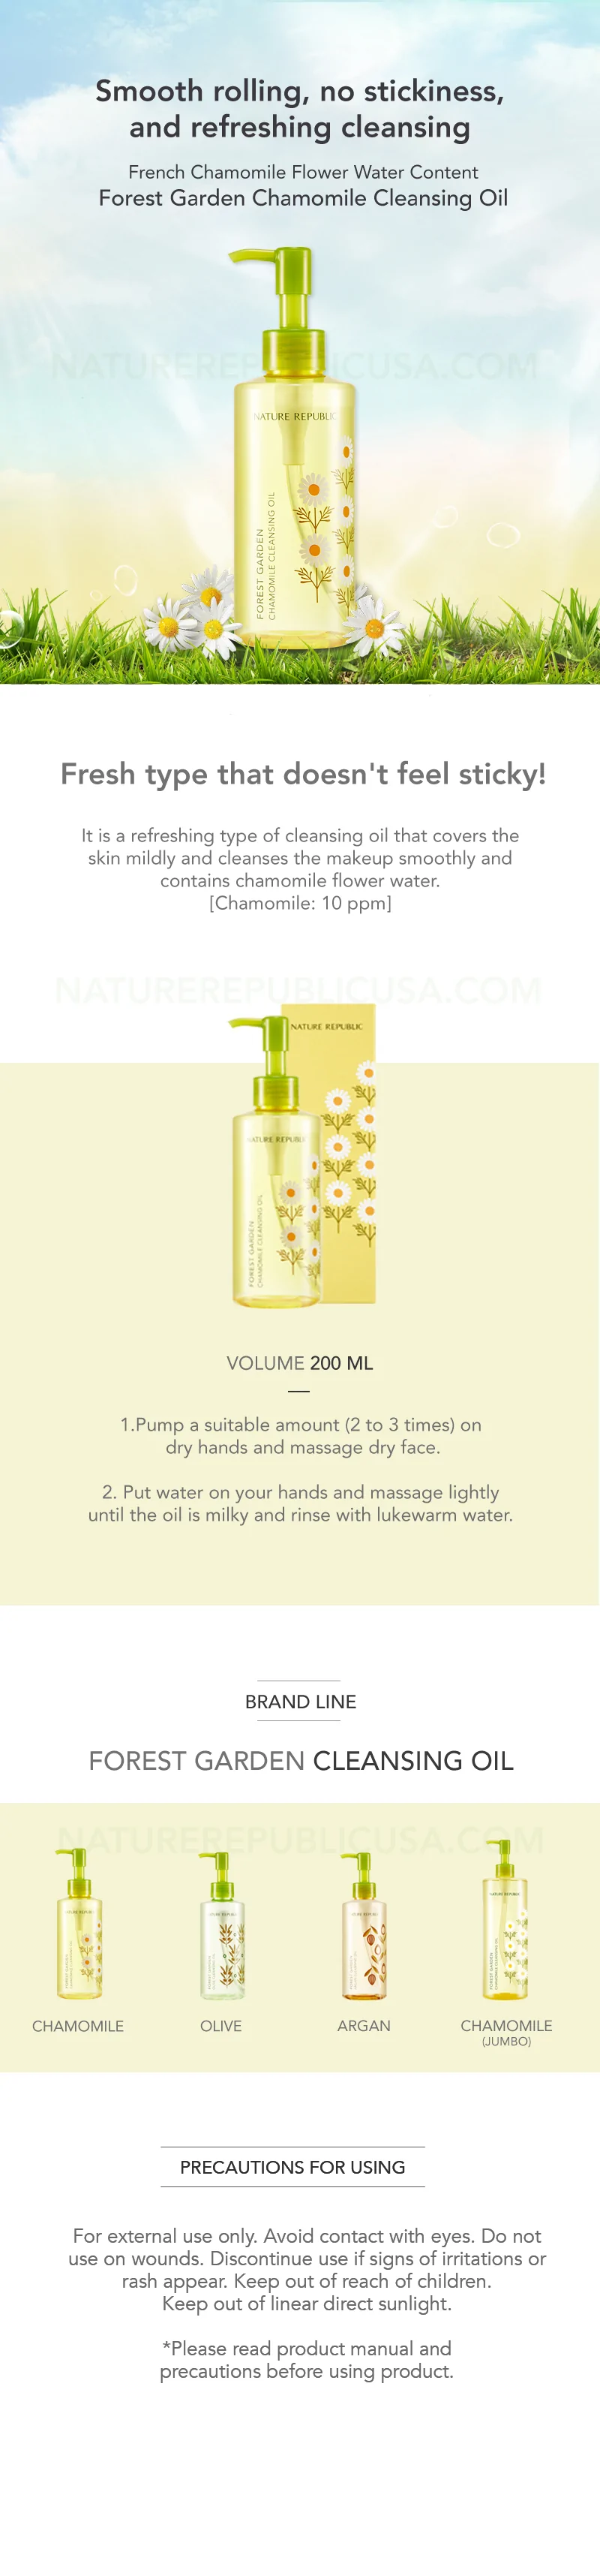 NATURE REPUBLIC Forest Garden Chamomile Cleansing Oil 200ml - review India